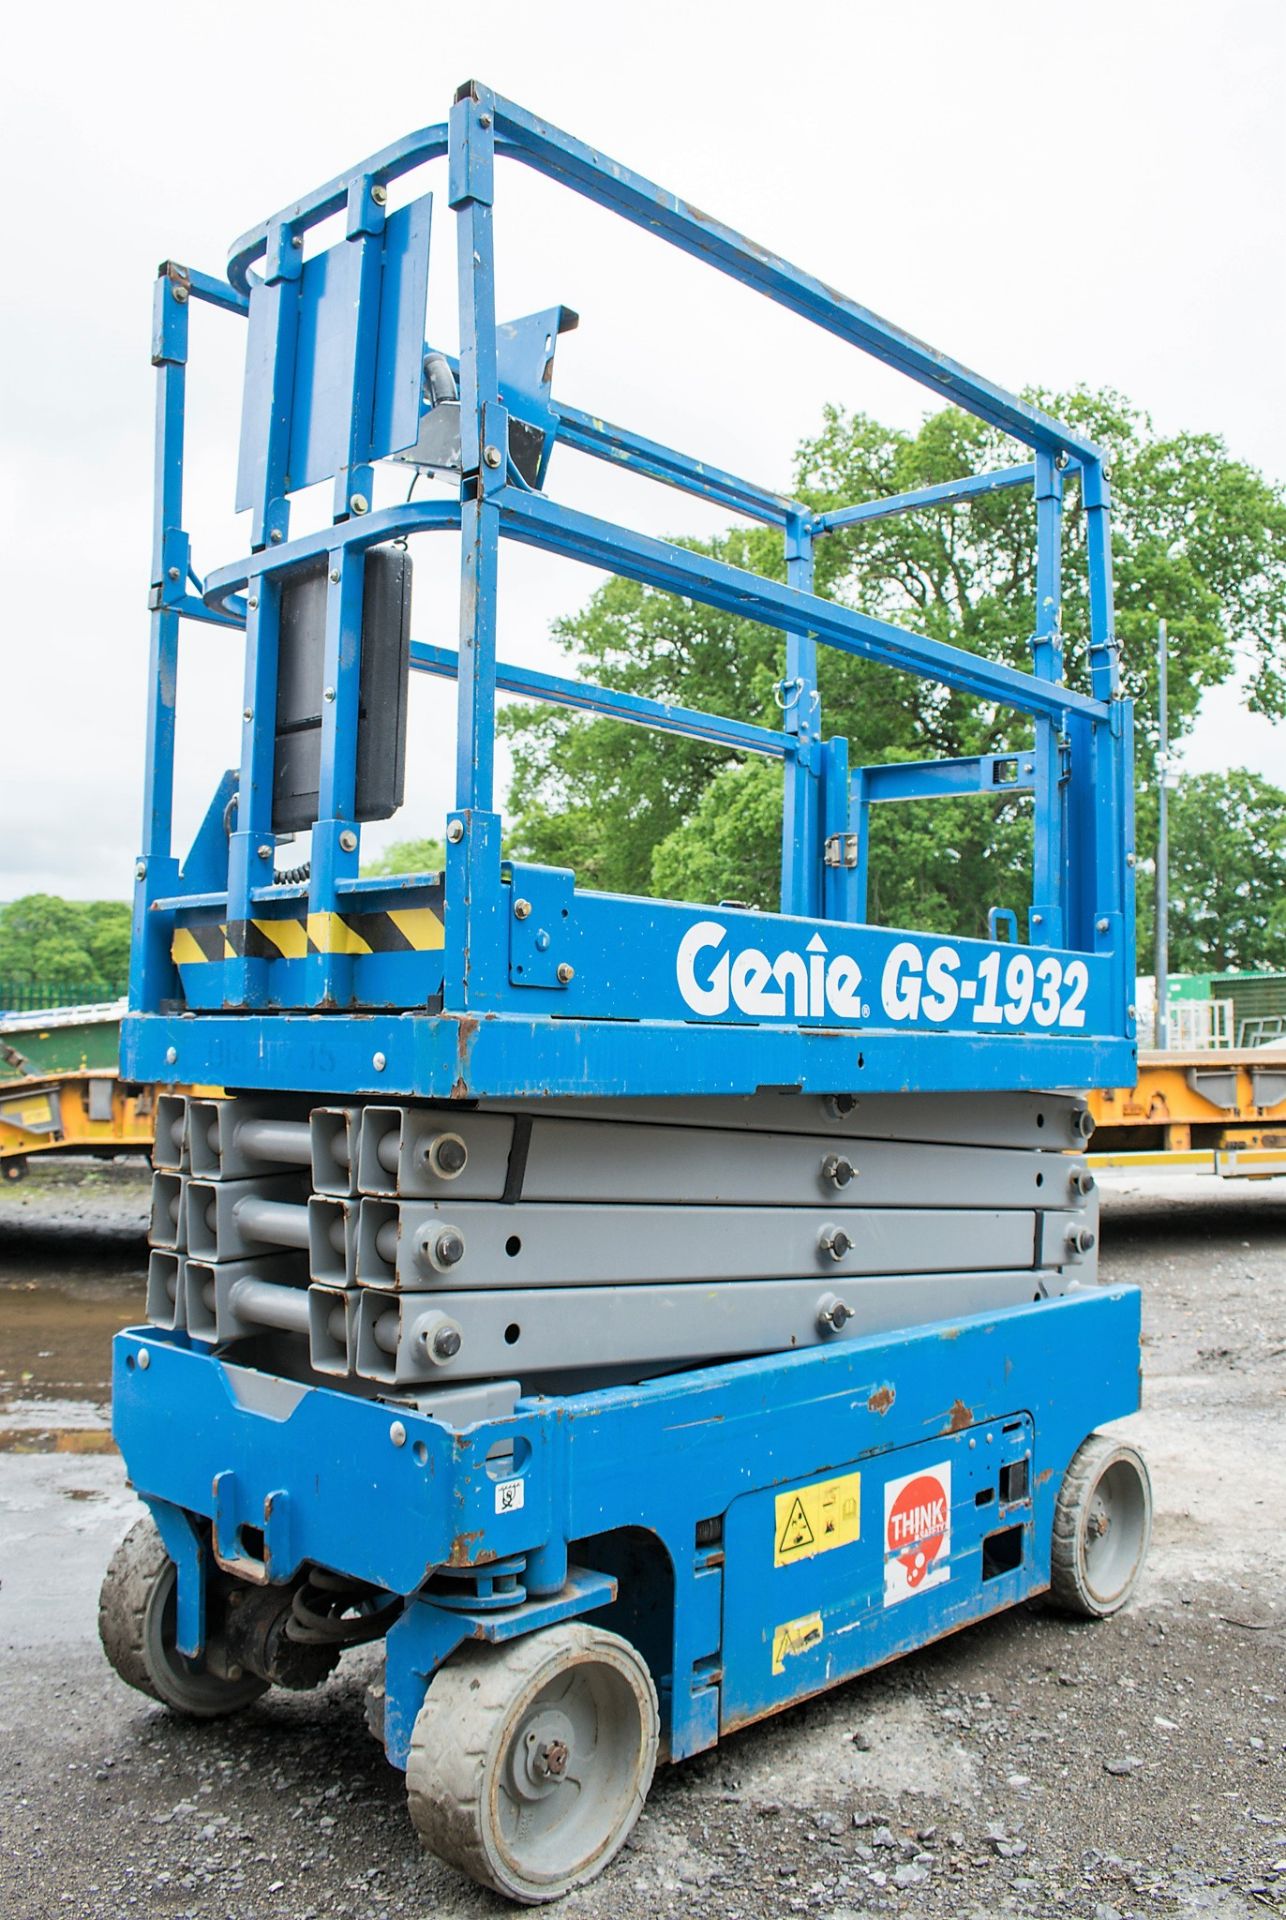 Genie GS 1932 19 ft battery electirc scissor lift access platform Year: 2014 S/N: 13956 Recorded - Image 3 of 9